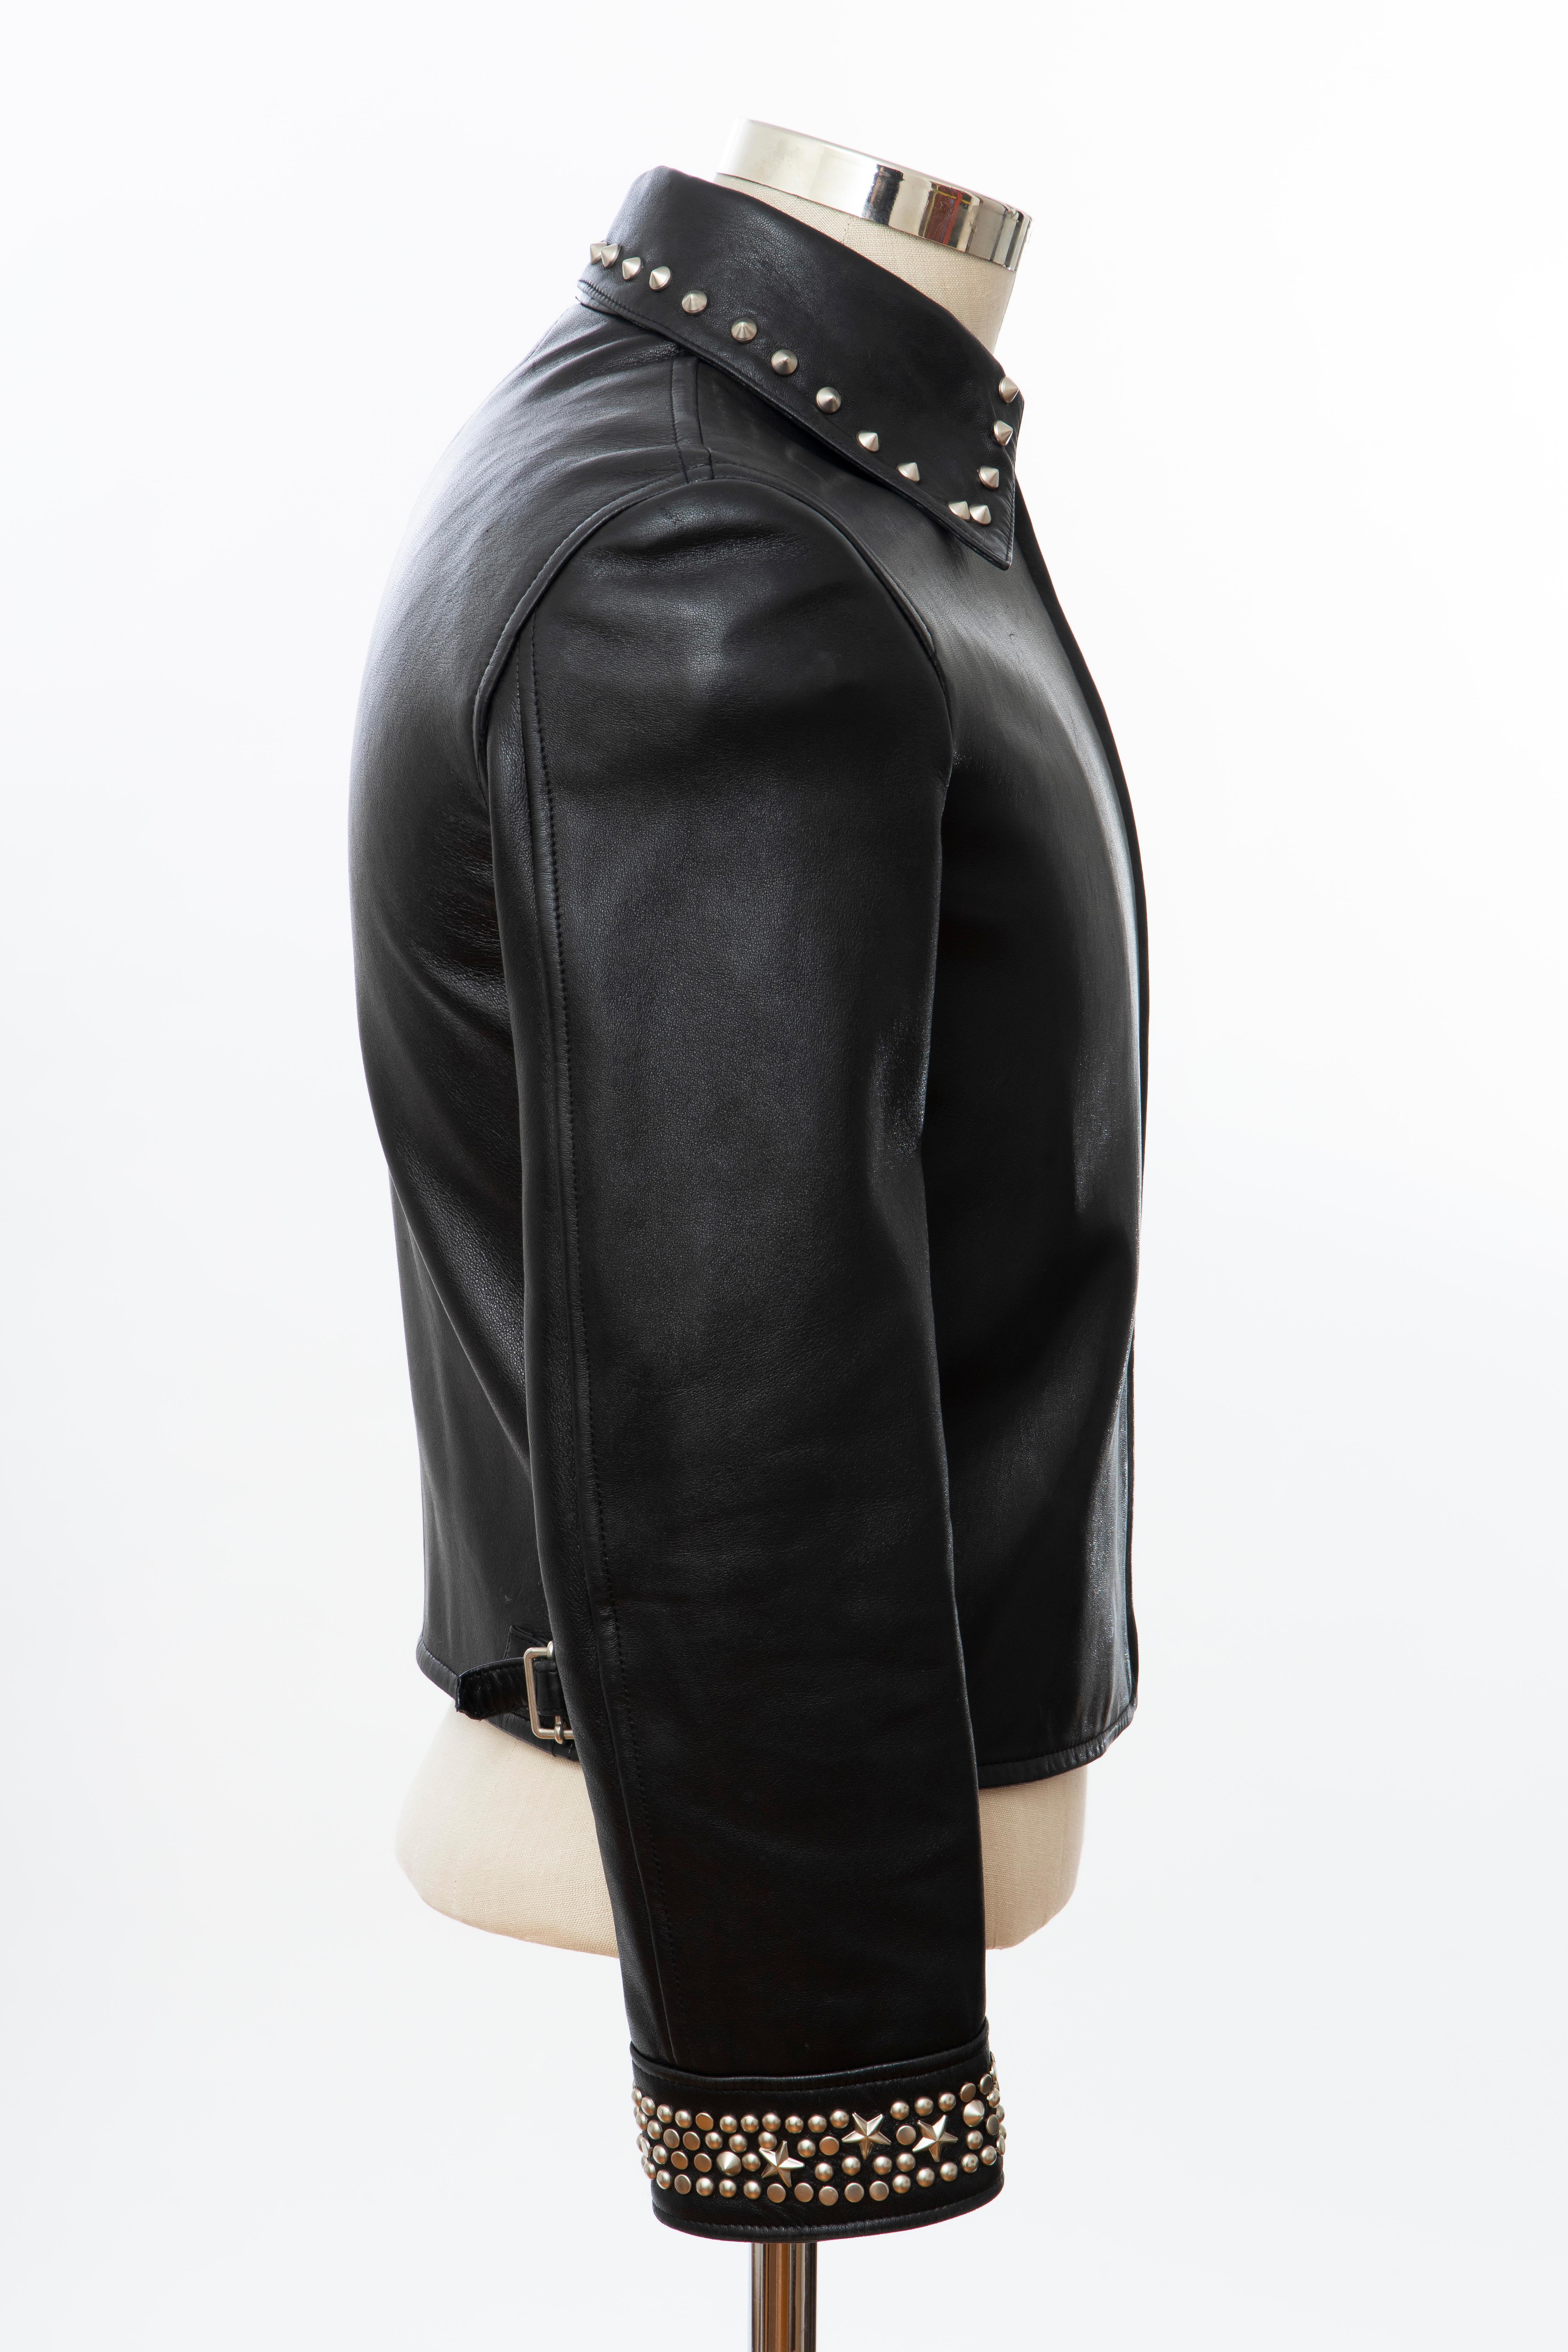 Gianni Versace Black Leather Jacket Pewter Stud Collar & Cuffs,  Circa: 1990's For Sale 6